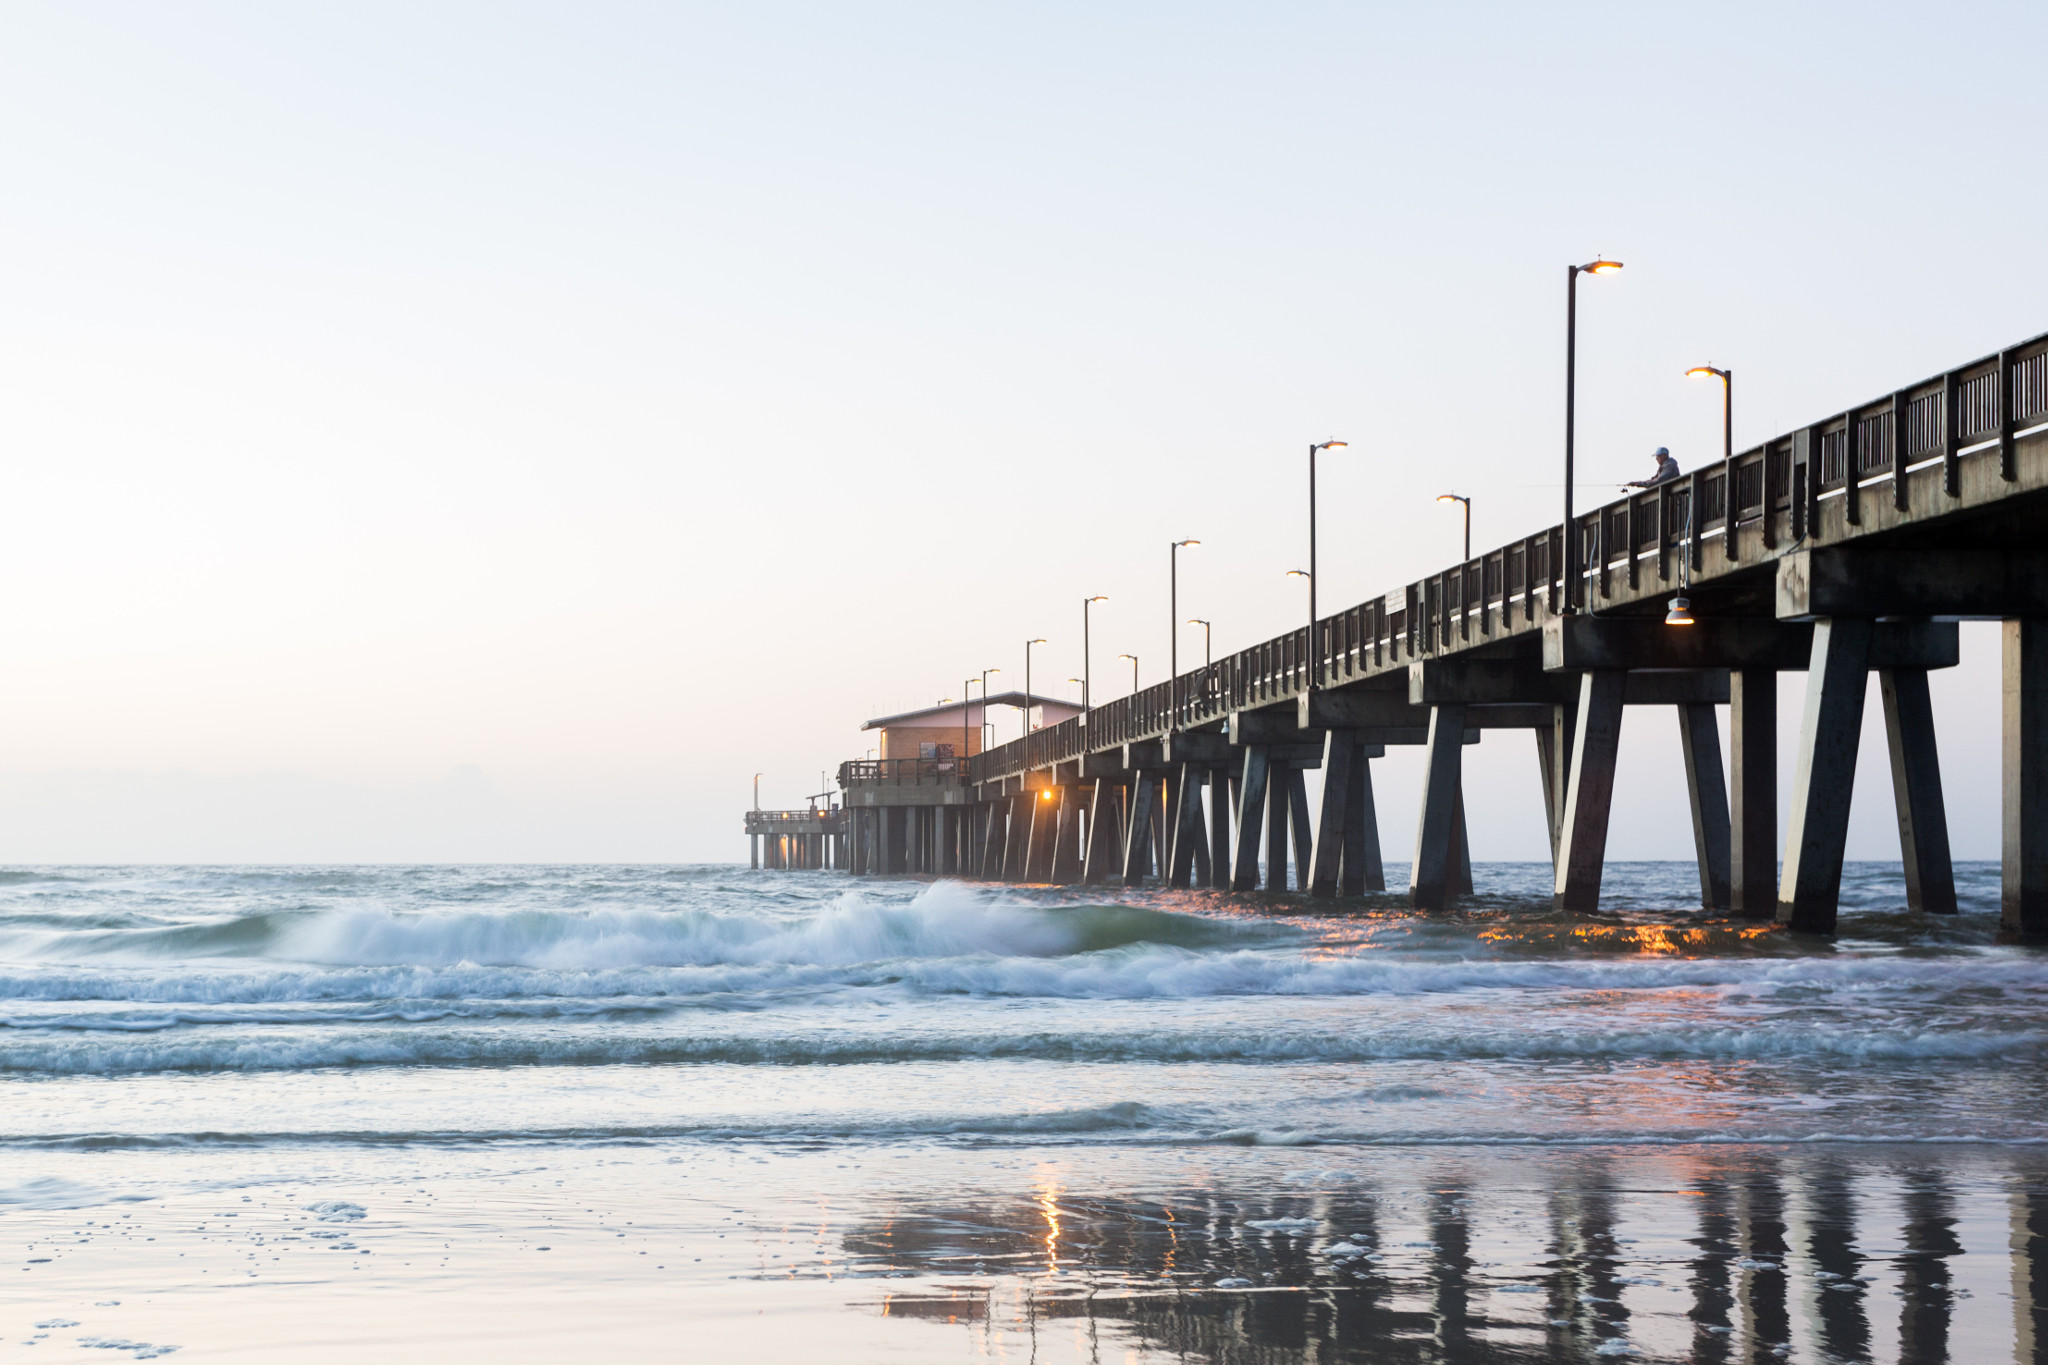 The Gulf State Park Pier offers fishing opportunities and a great view